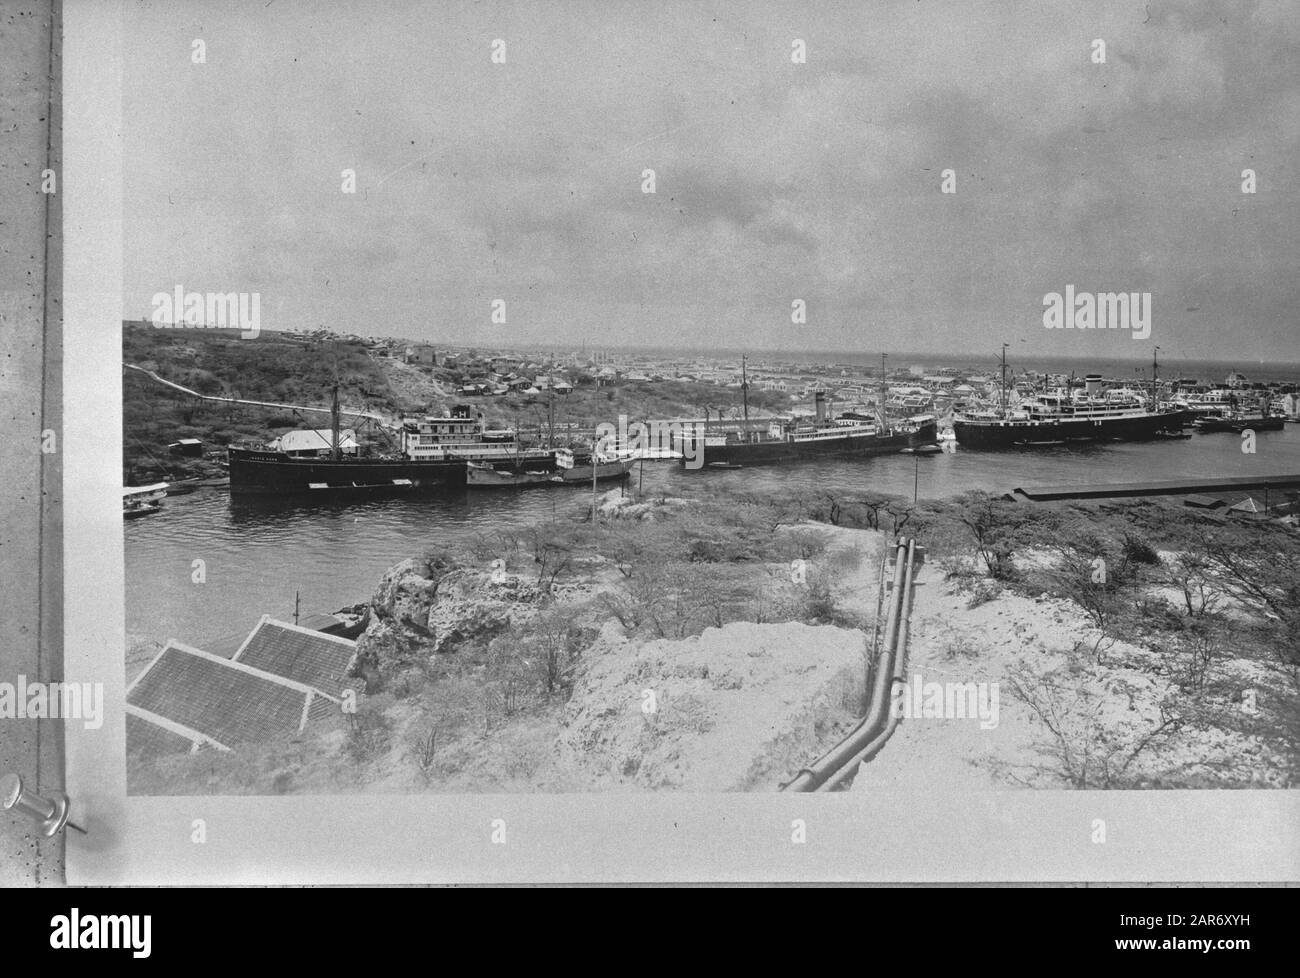 Wi [West Indies]/Anefo London series  [Dutch West Indies. Curacao. View of Willemstad's St Annahaven, which connects the Schottegat lagoon to the ocean. The cargo ship in the middle is moored at one of the docks of the Curacao Handel Maatschappij. The pipelines lead to Caracas bay] Annotation: Repronegative Date: {1940-1945} Location: Curaçao, Willemstad Keywords: ports, ships, World War II Stock Photo